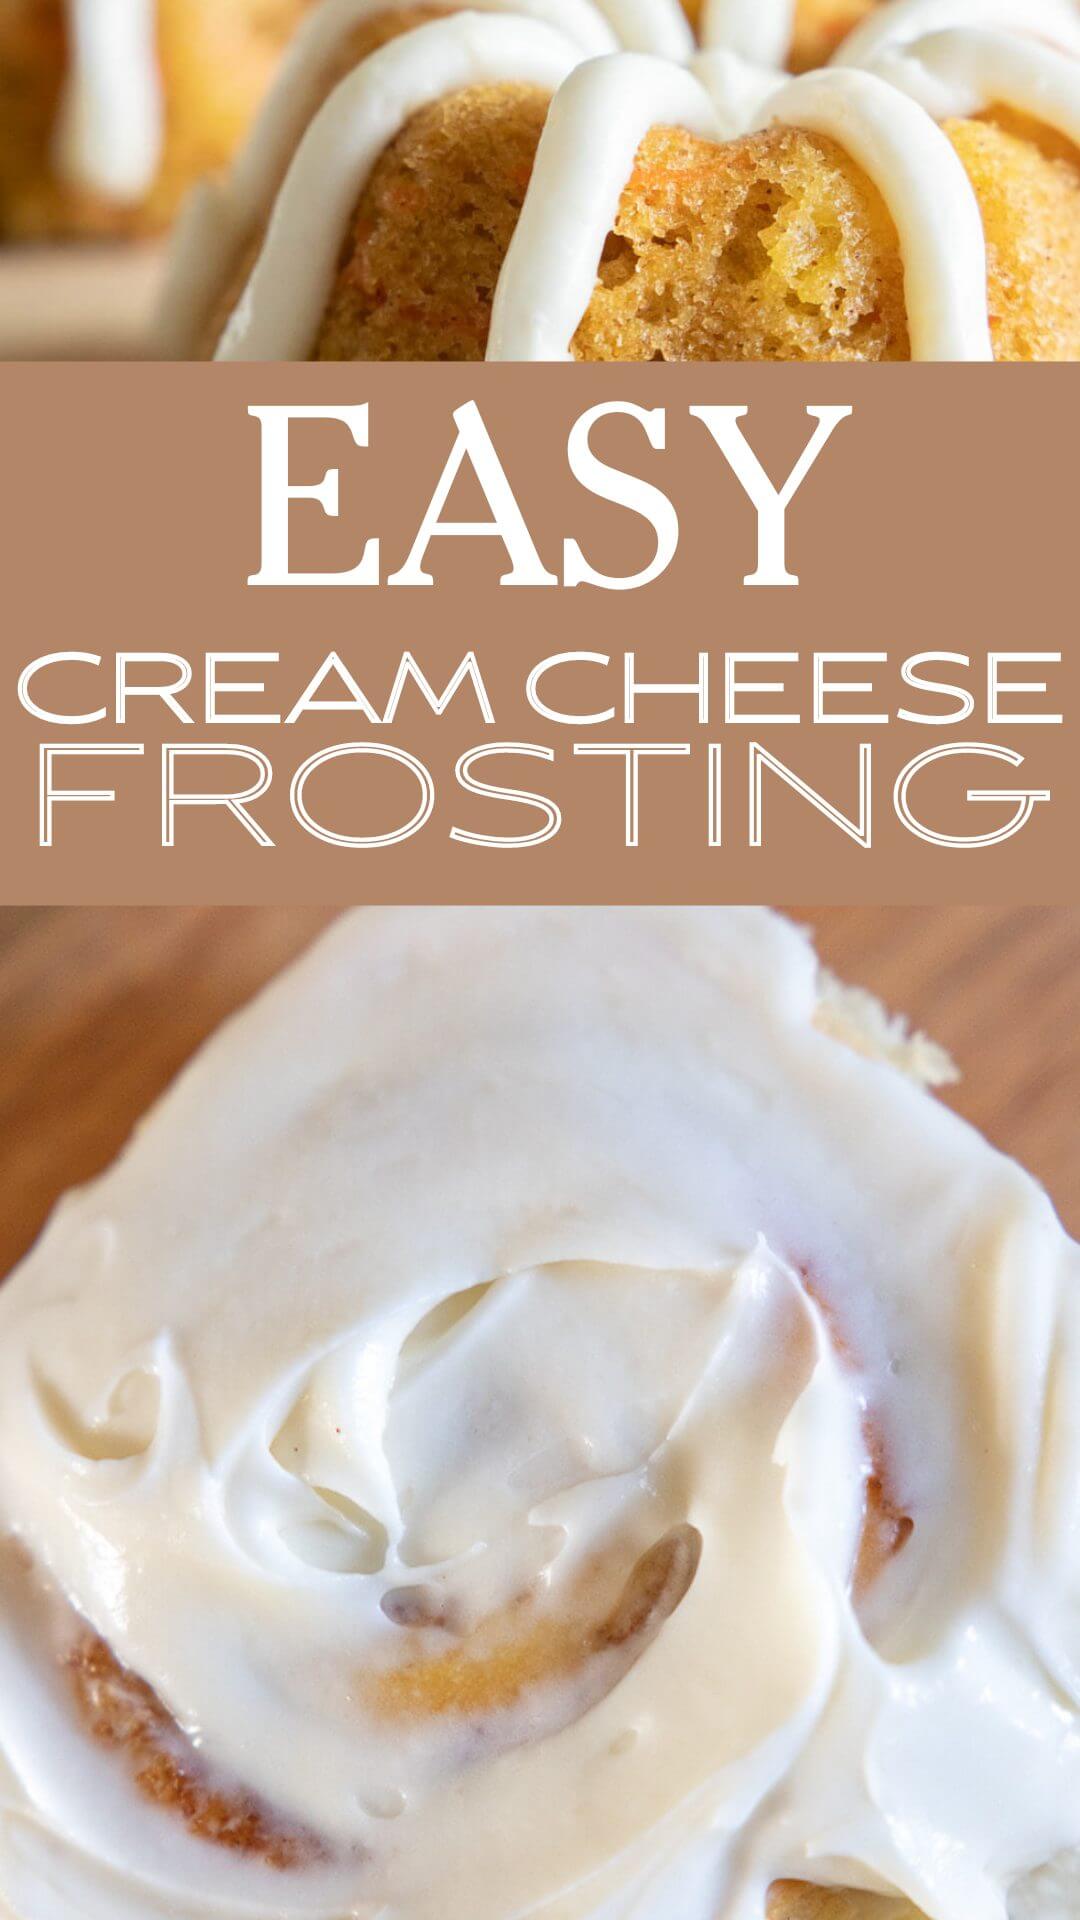 This is the yummiest frosting!  Make this cream cheese frosting recipe right now! It is good on cupcakes,  cakes, cookies, and cinnamon rolls! Its delicious and so easy to make! It is a versatile frosting that can be used for some many different desserts.